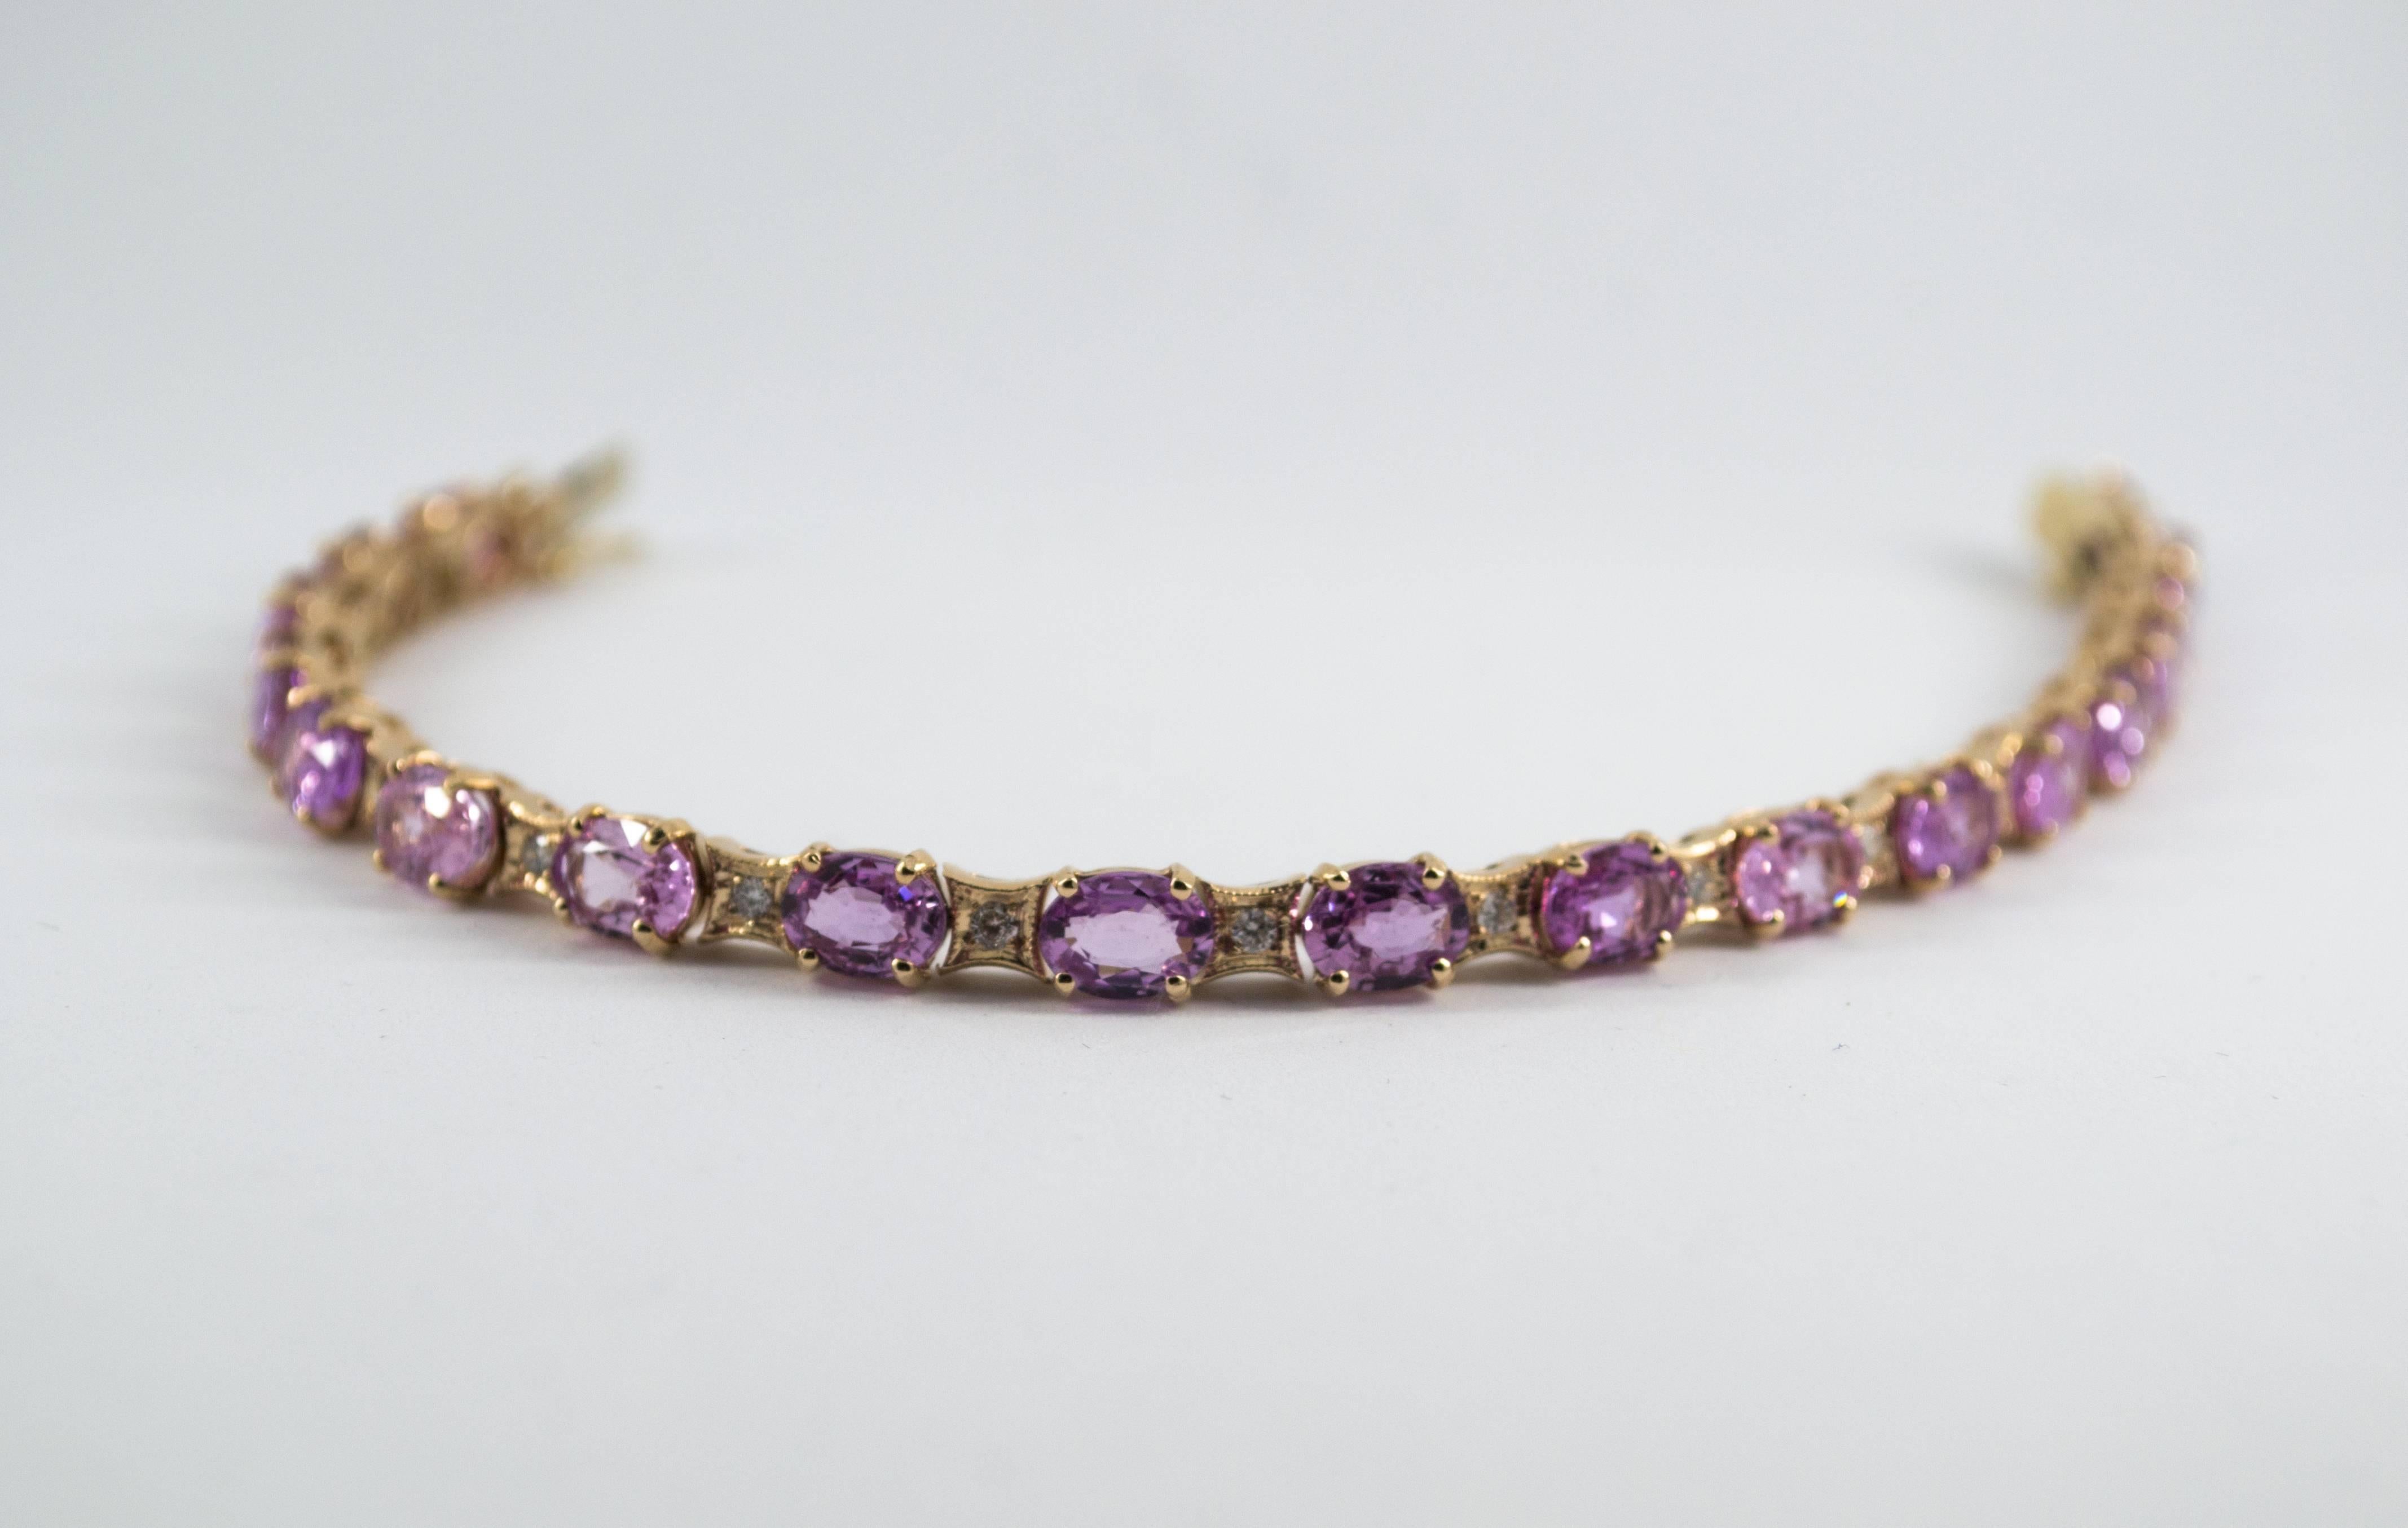 This Bracelet is made of 14K Yellow Gold.
This Bracelet has 0.50 Carats of White Diamonds.
This Bracelet has 18.65 Carats of Pink Sapphires.
We're a workshop so every piece is handmade, customizable and resizable.